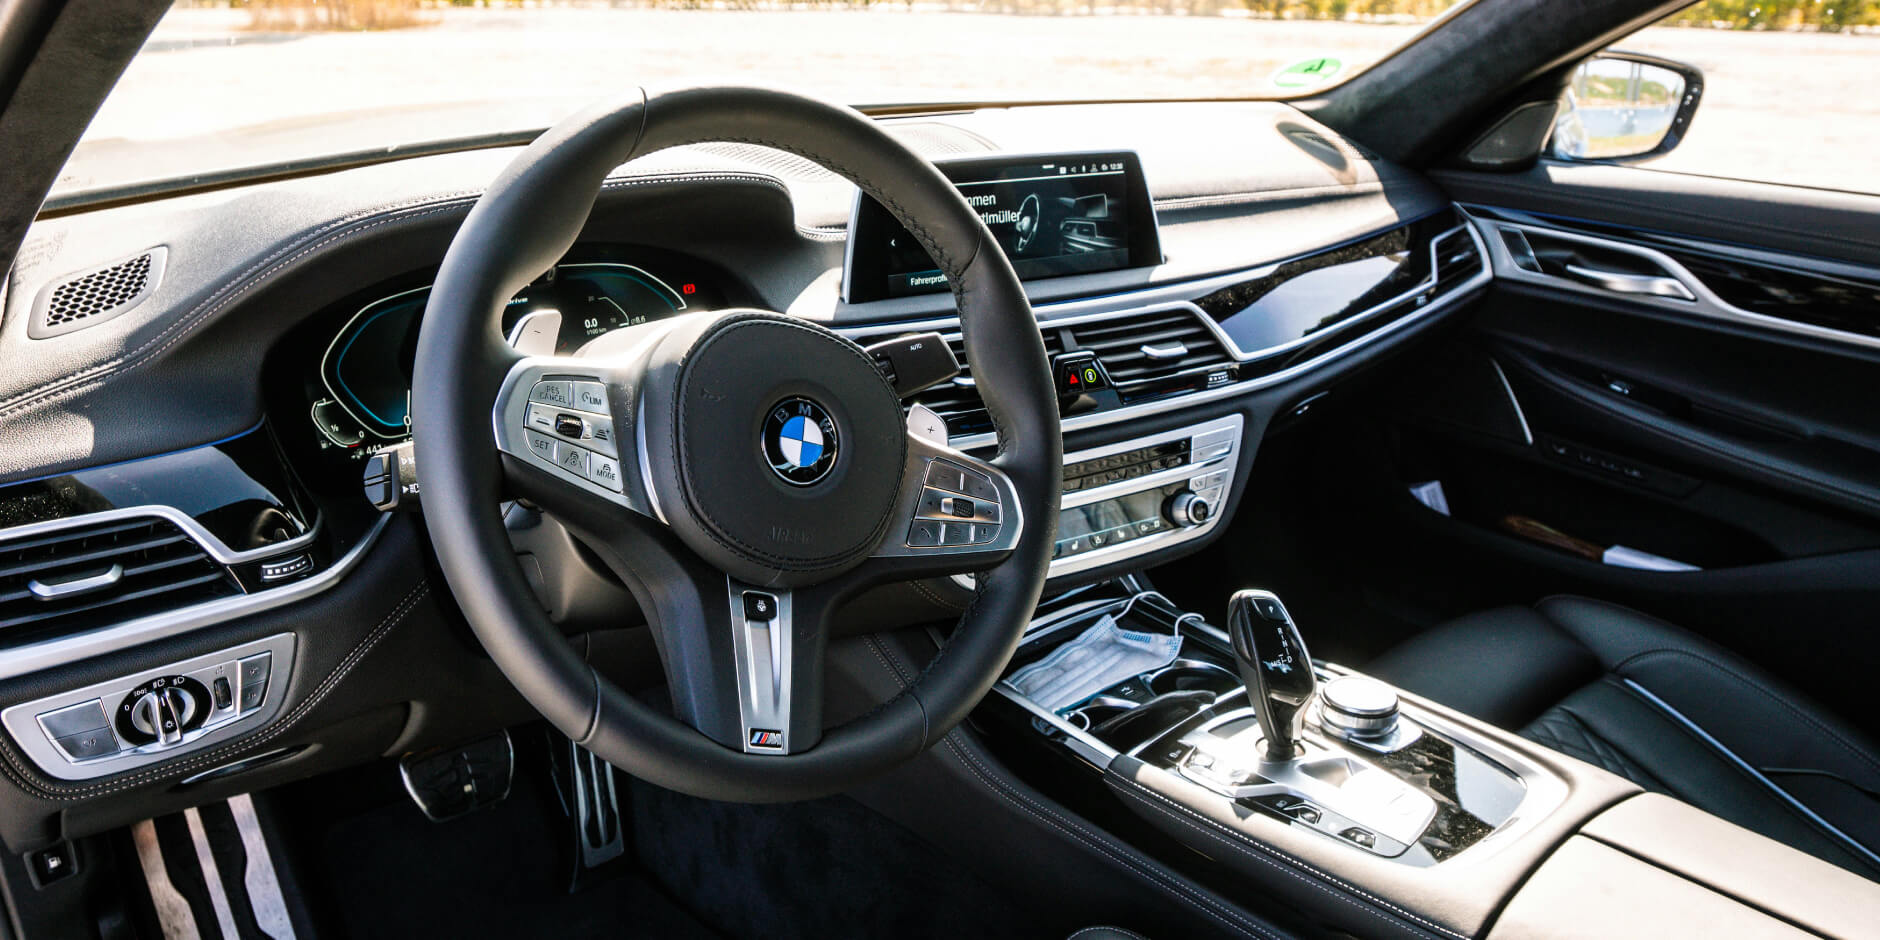 Top Maintenance Tips for Your Hired BMW